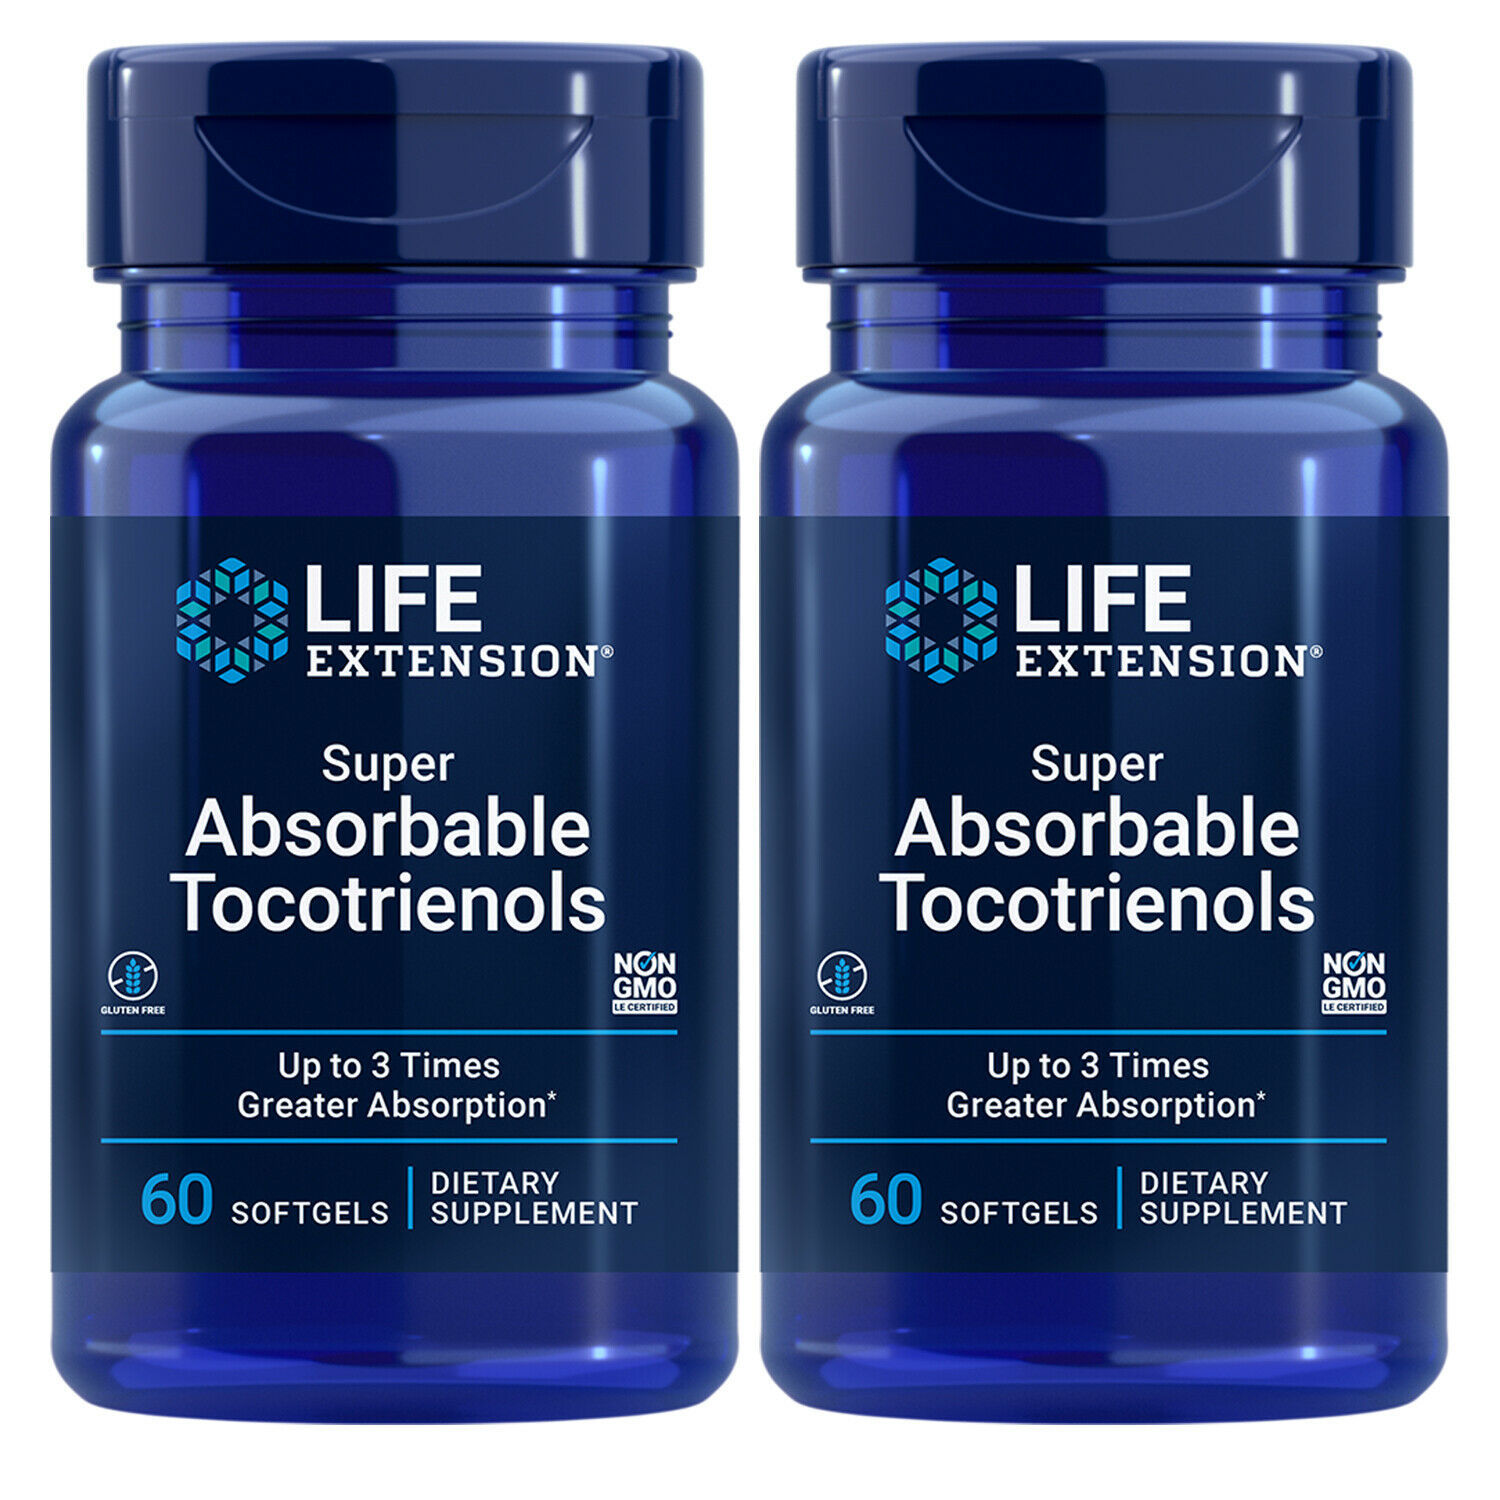 Super Absorbable Tocotrienols, 2X60gels Life Extension Most Absorbable Vitamin E